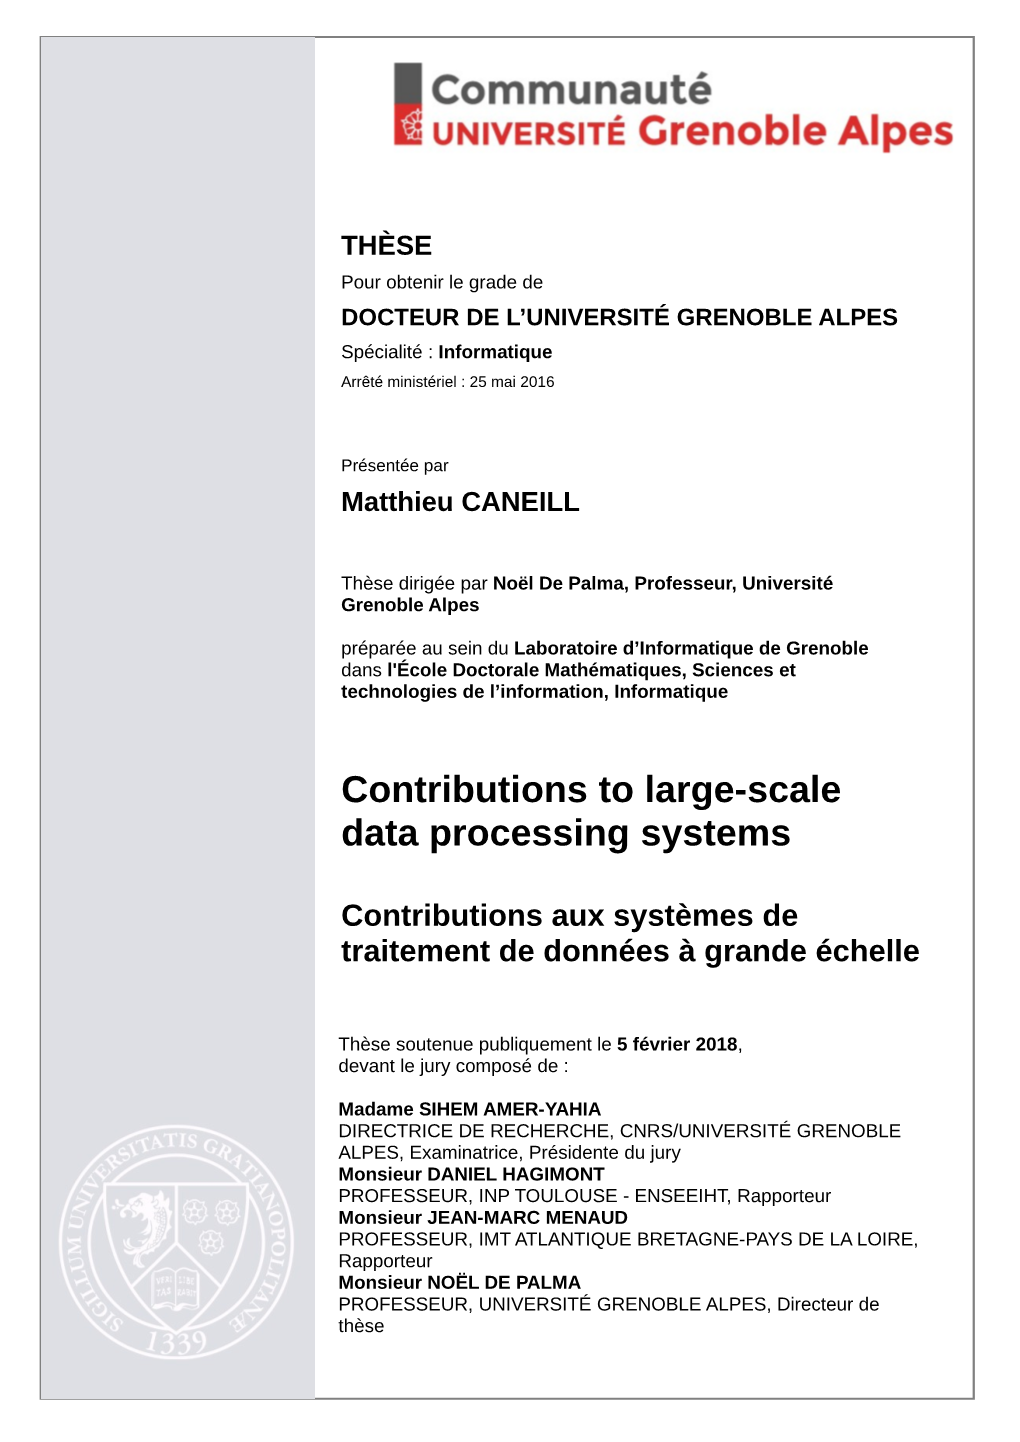 Contributions to Large-Scale Data Processing Systems